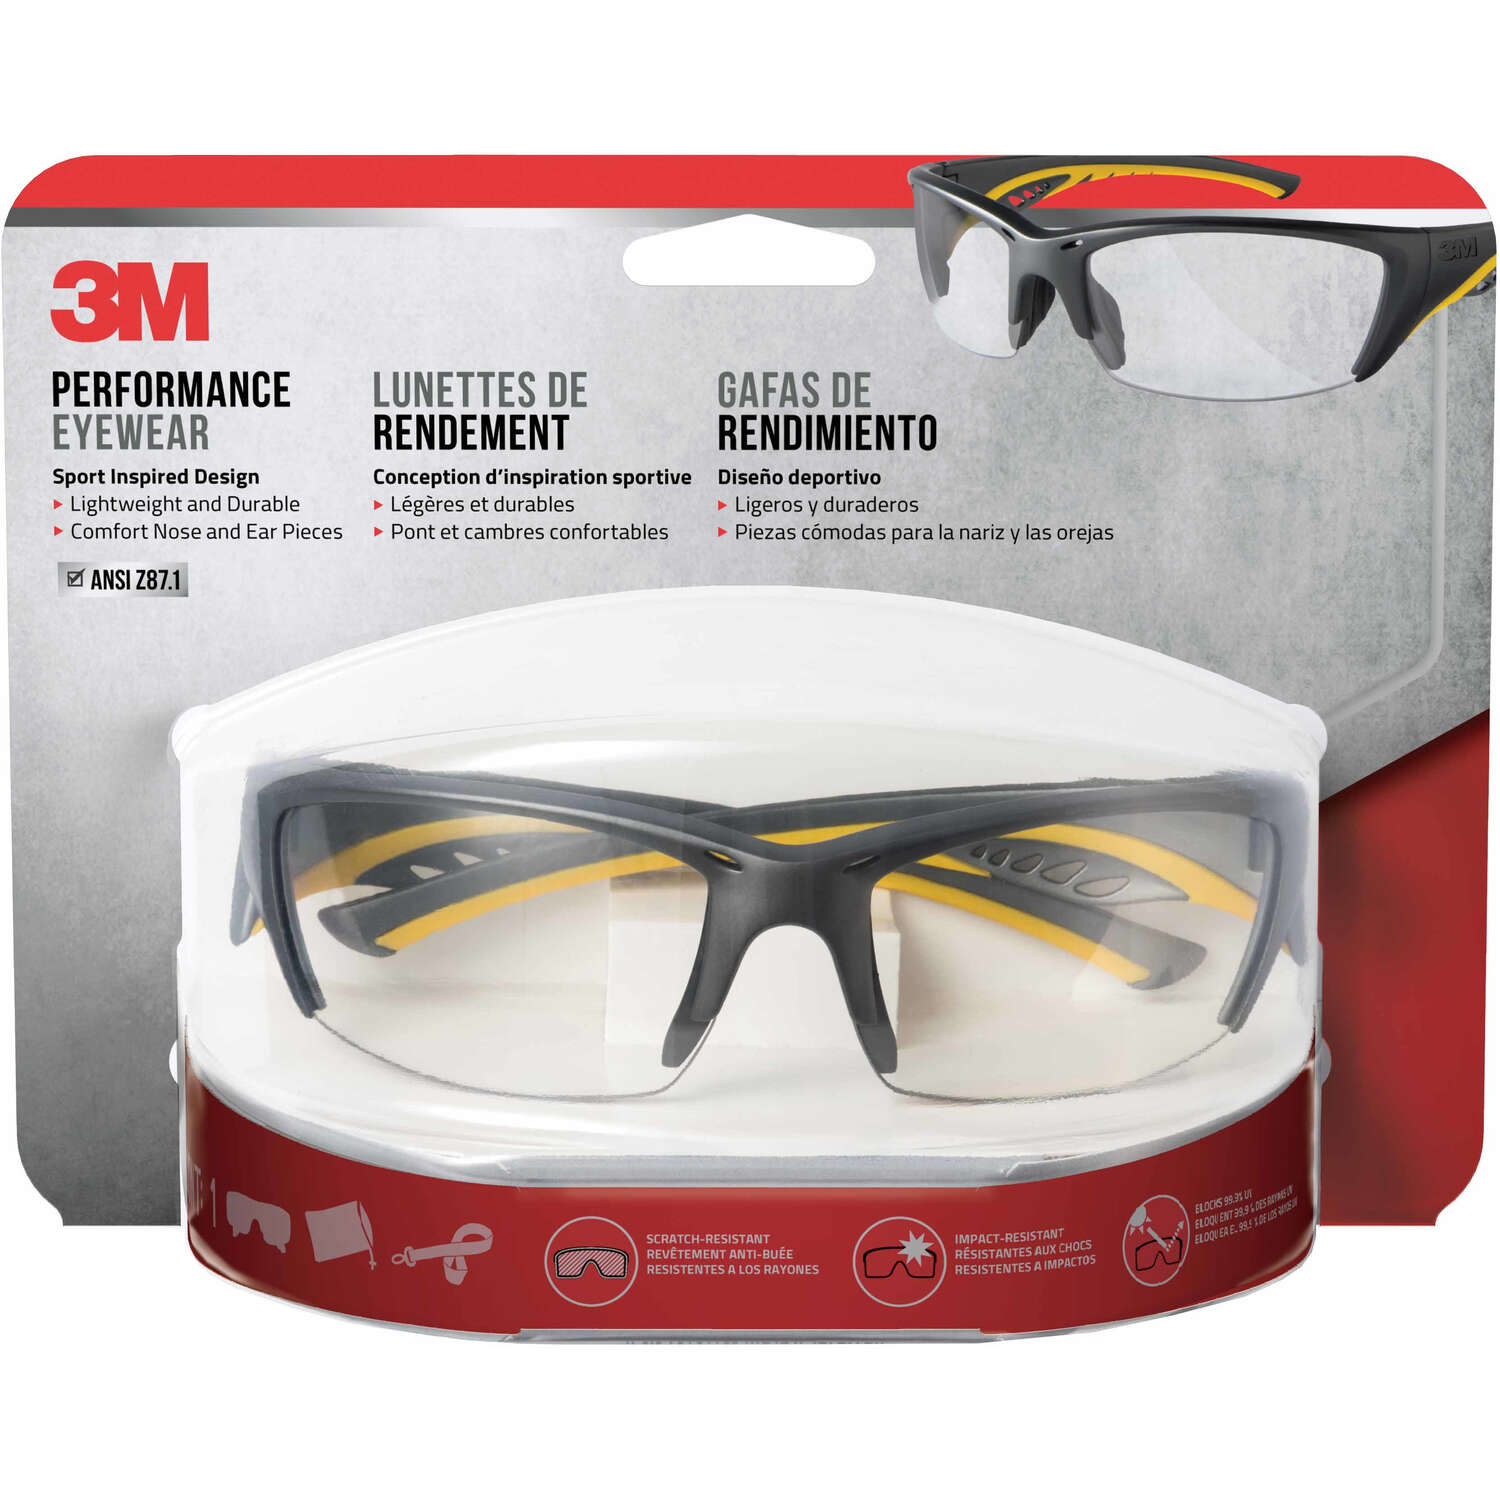 3M Tinted Frame with Tinted Scratch Resistant Lenses Eyeglass